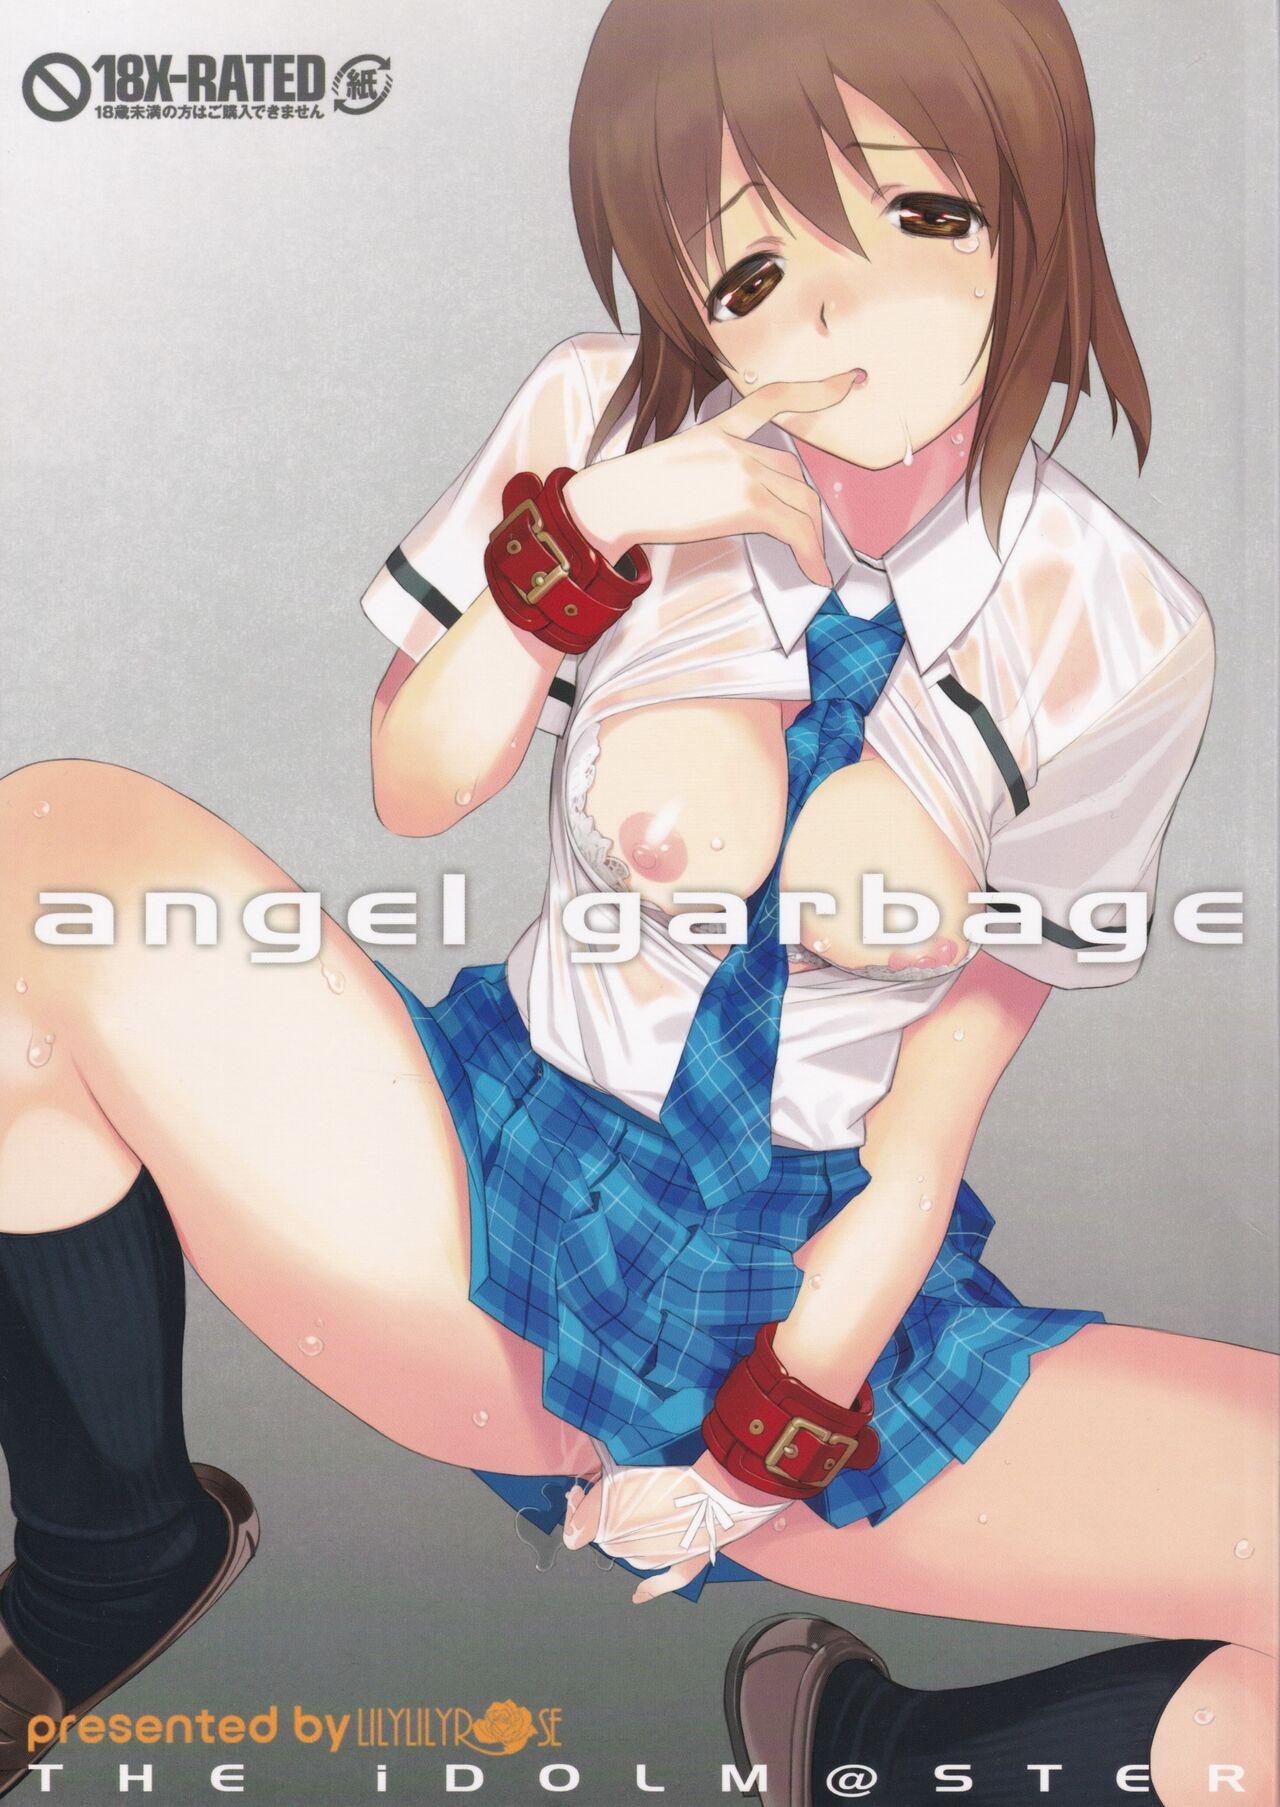 Amador angel garbage - The idolmaster Ride - Page 1